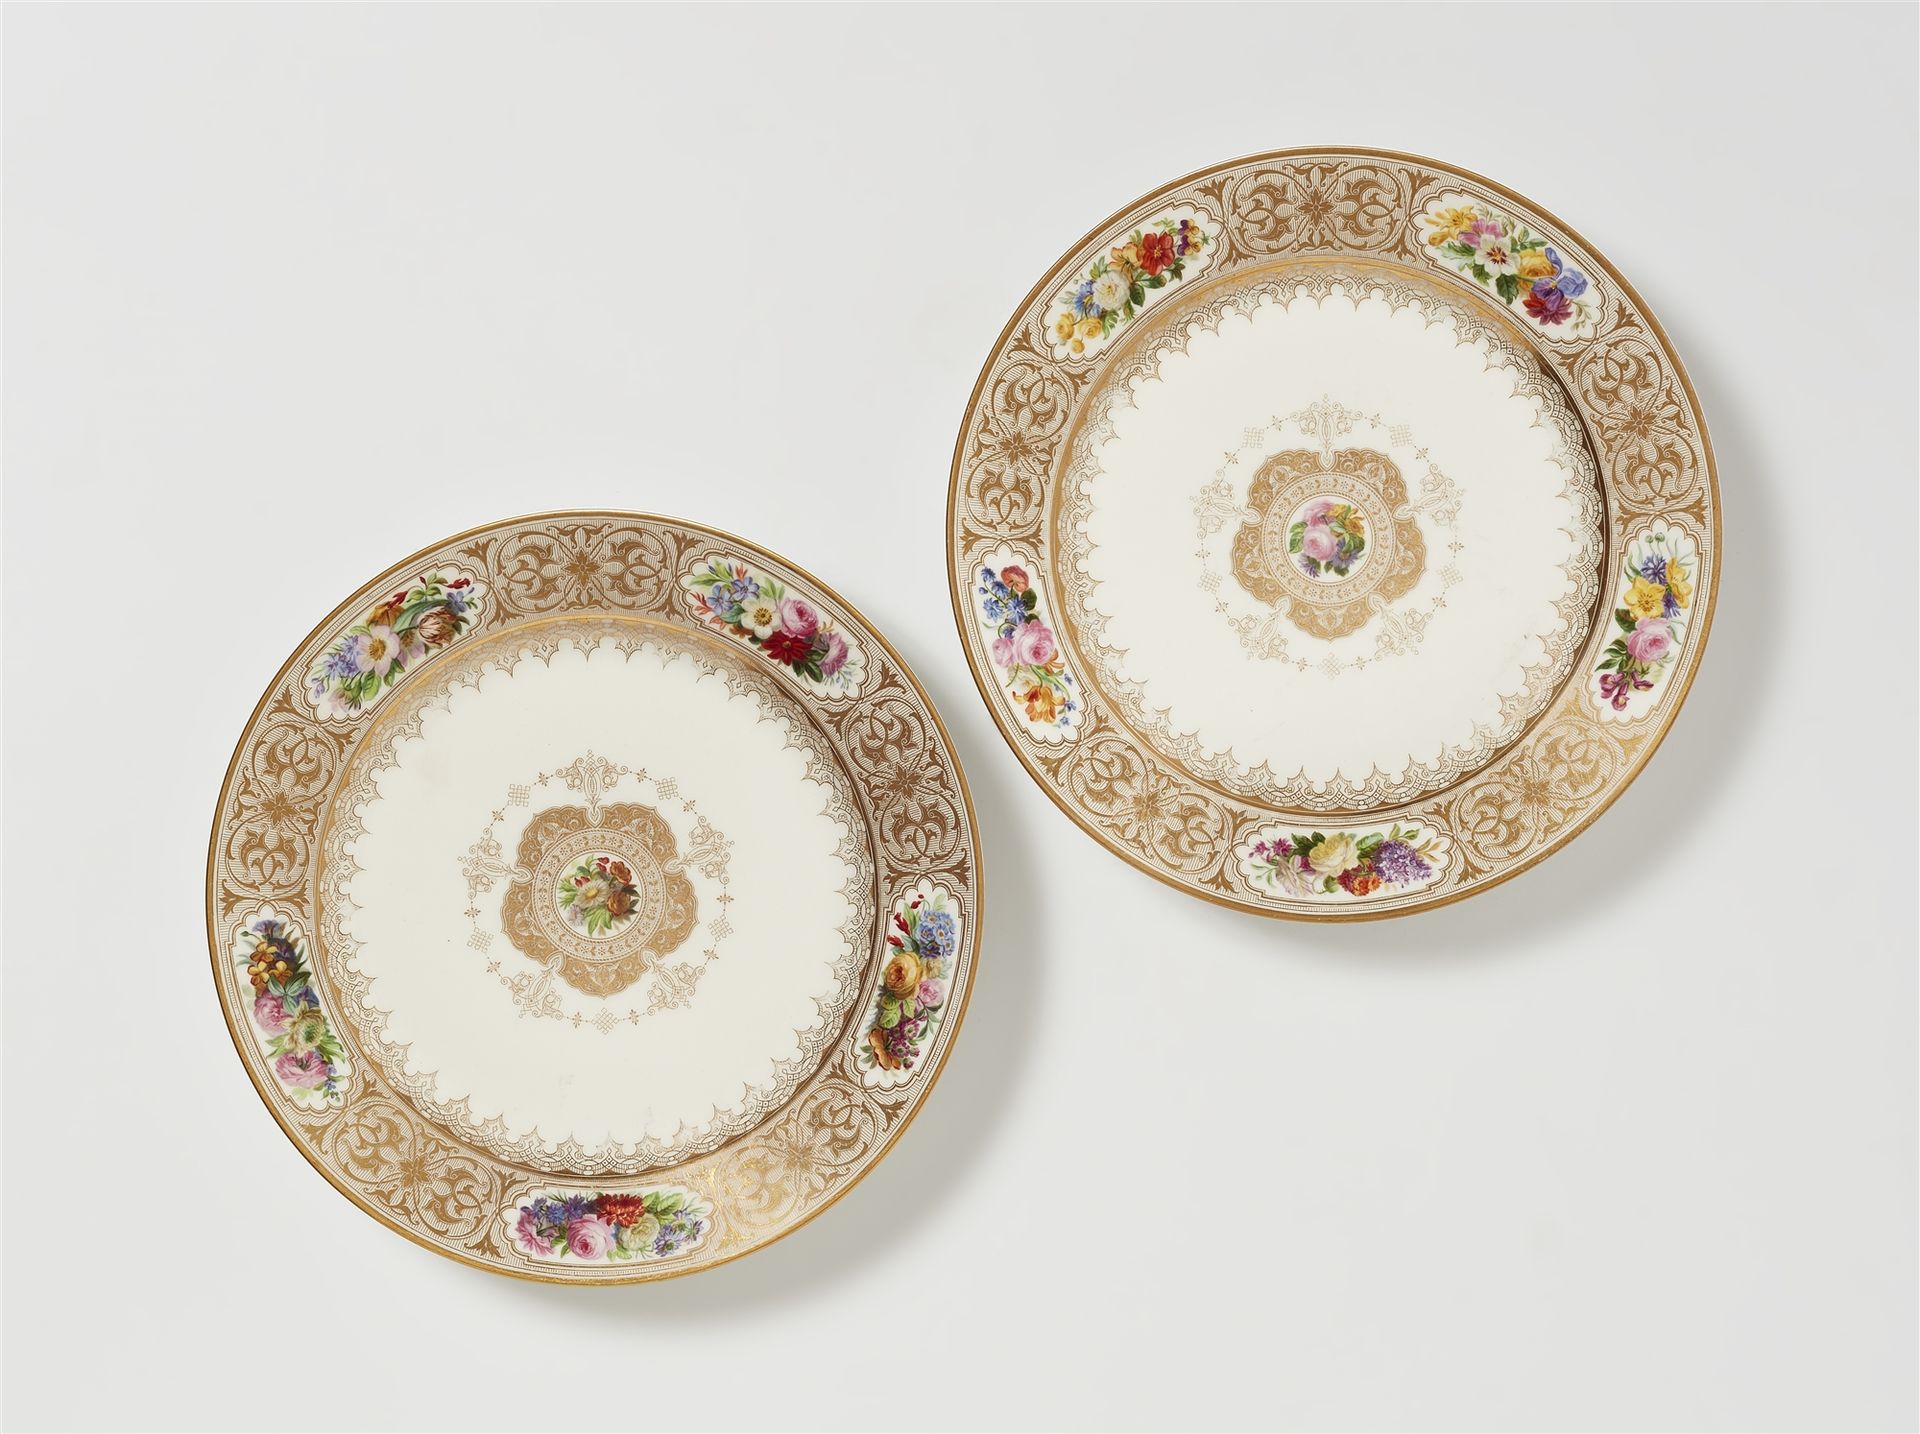 Sèvres Pair of plates from the dessert service for the Château de Trianon

Porce&hellip;